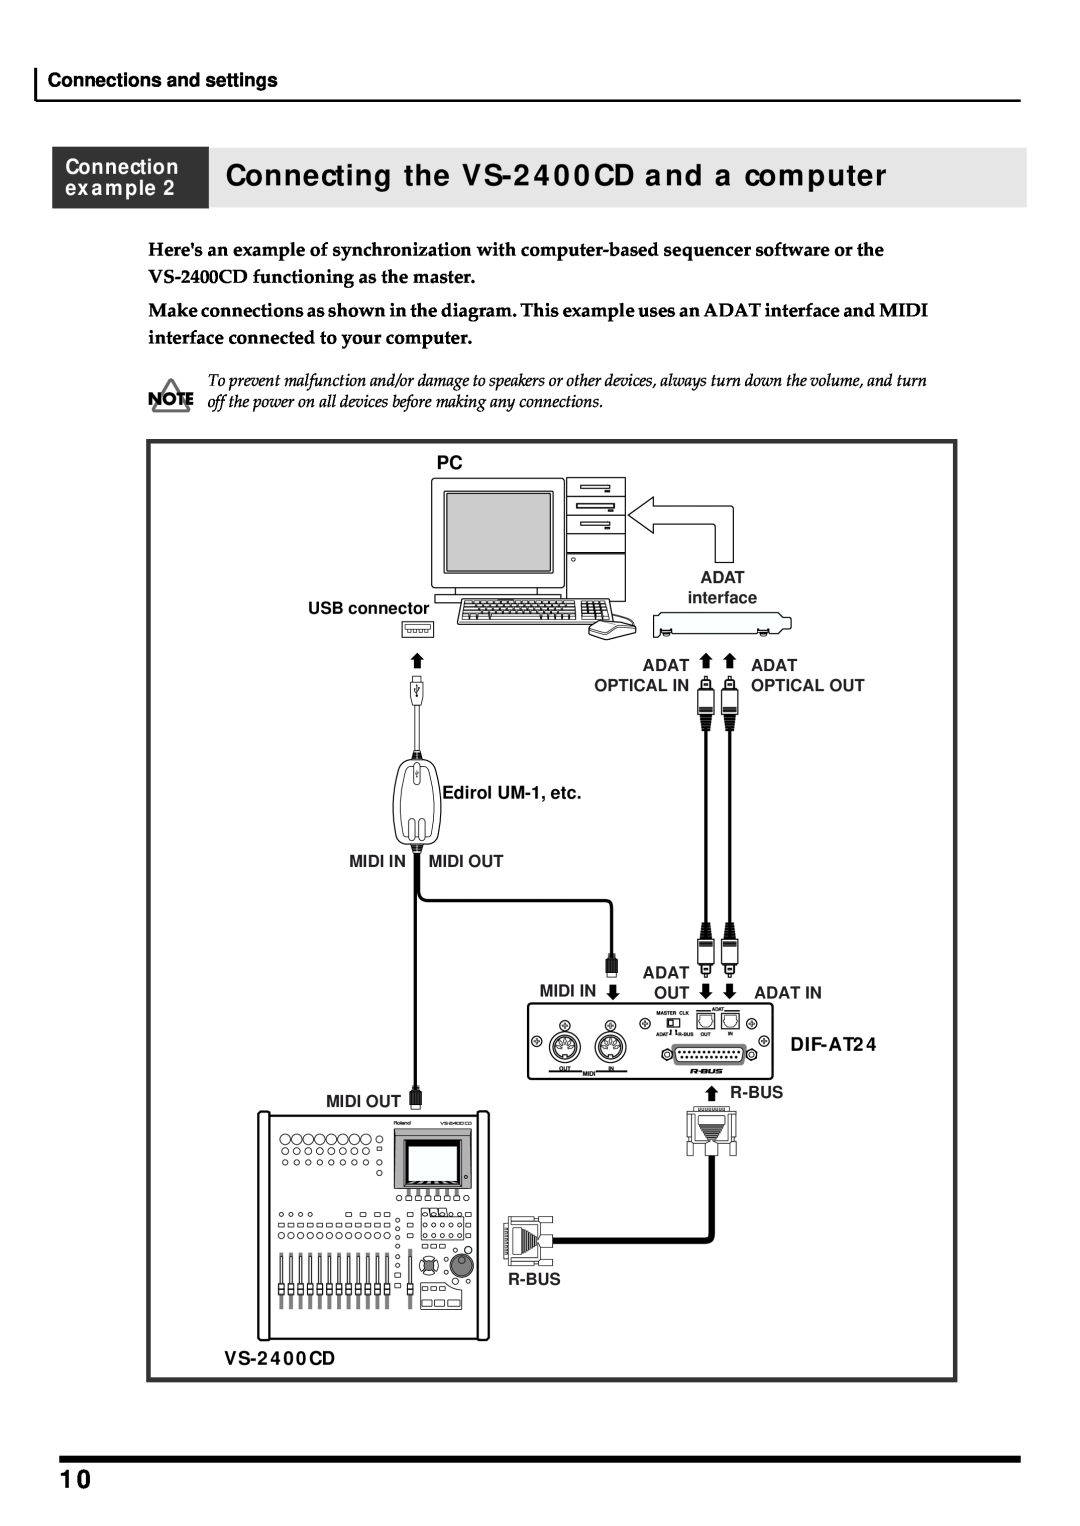 Roland DIF-AT24 owner manual Connecting the VS-2400CD and a computer, Connection example, Edirol UM-1, etc, USB connector 